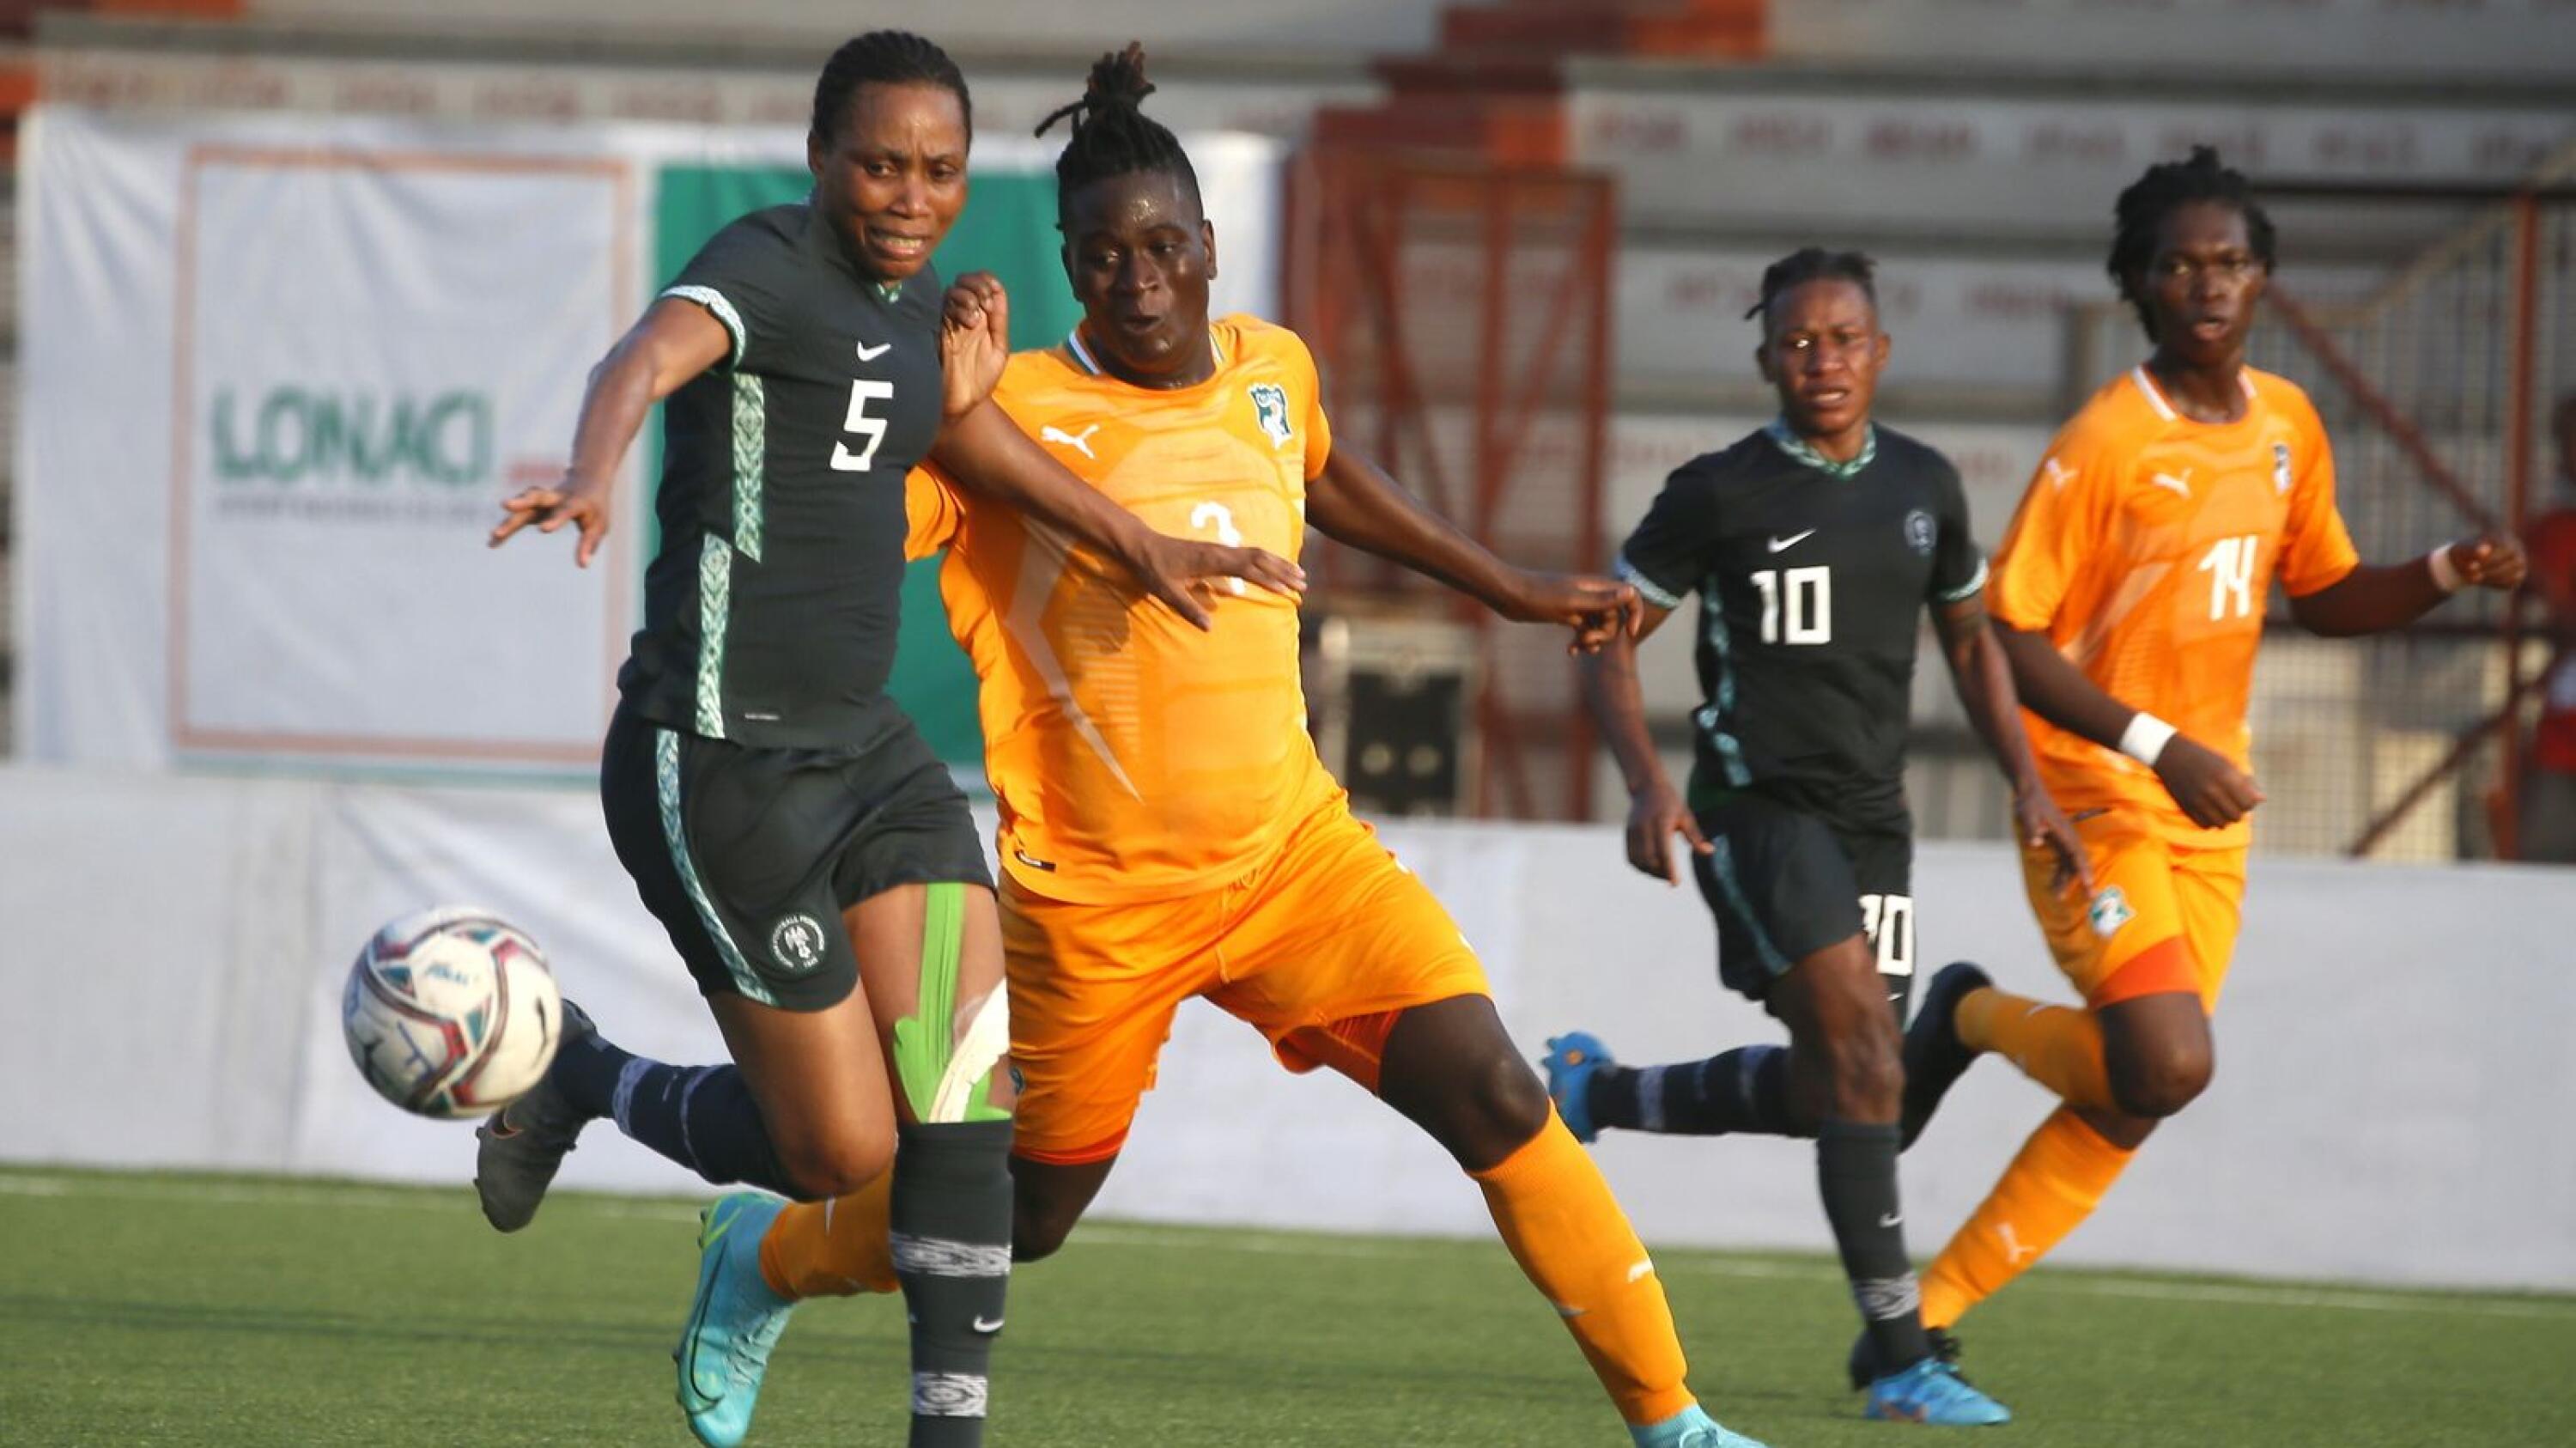 Diakité Binta of Ivory Coast (R)  fights for the ball with Obi Onowe of Nigeria (L) during the Women's Africa Cup of Nations Qualifiers between Ivory Coast and Nigeria at Robert Champroux Stadium in Abidjan